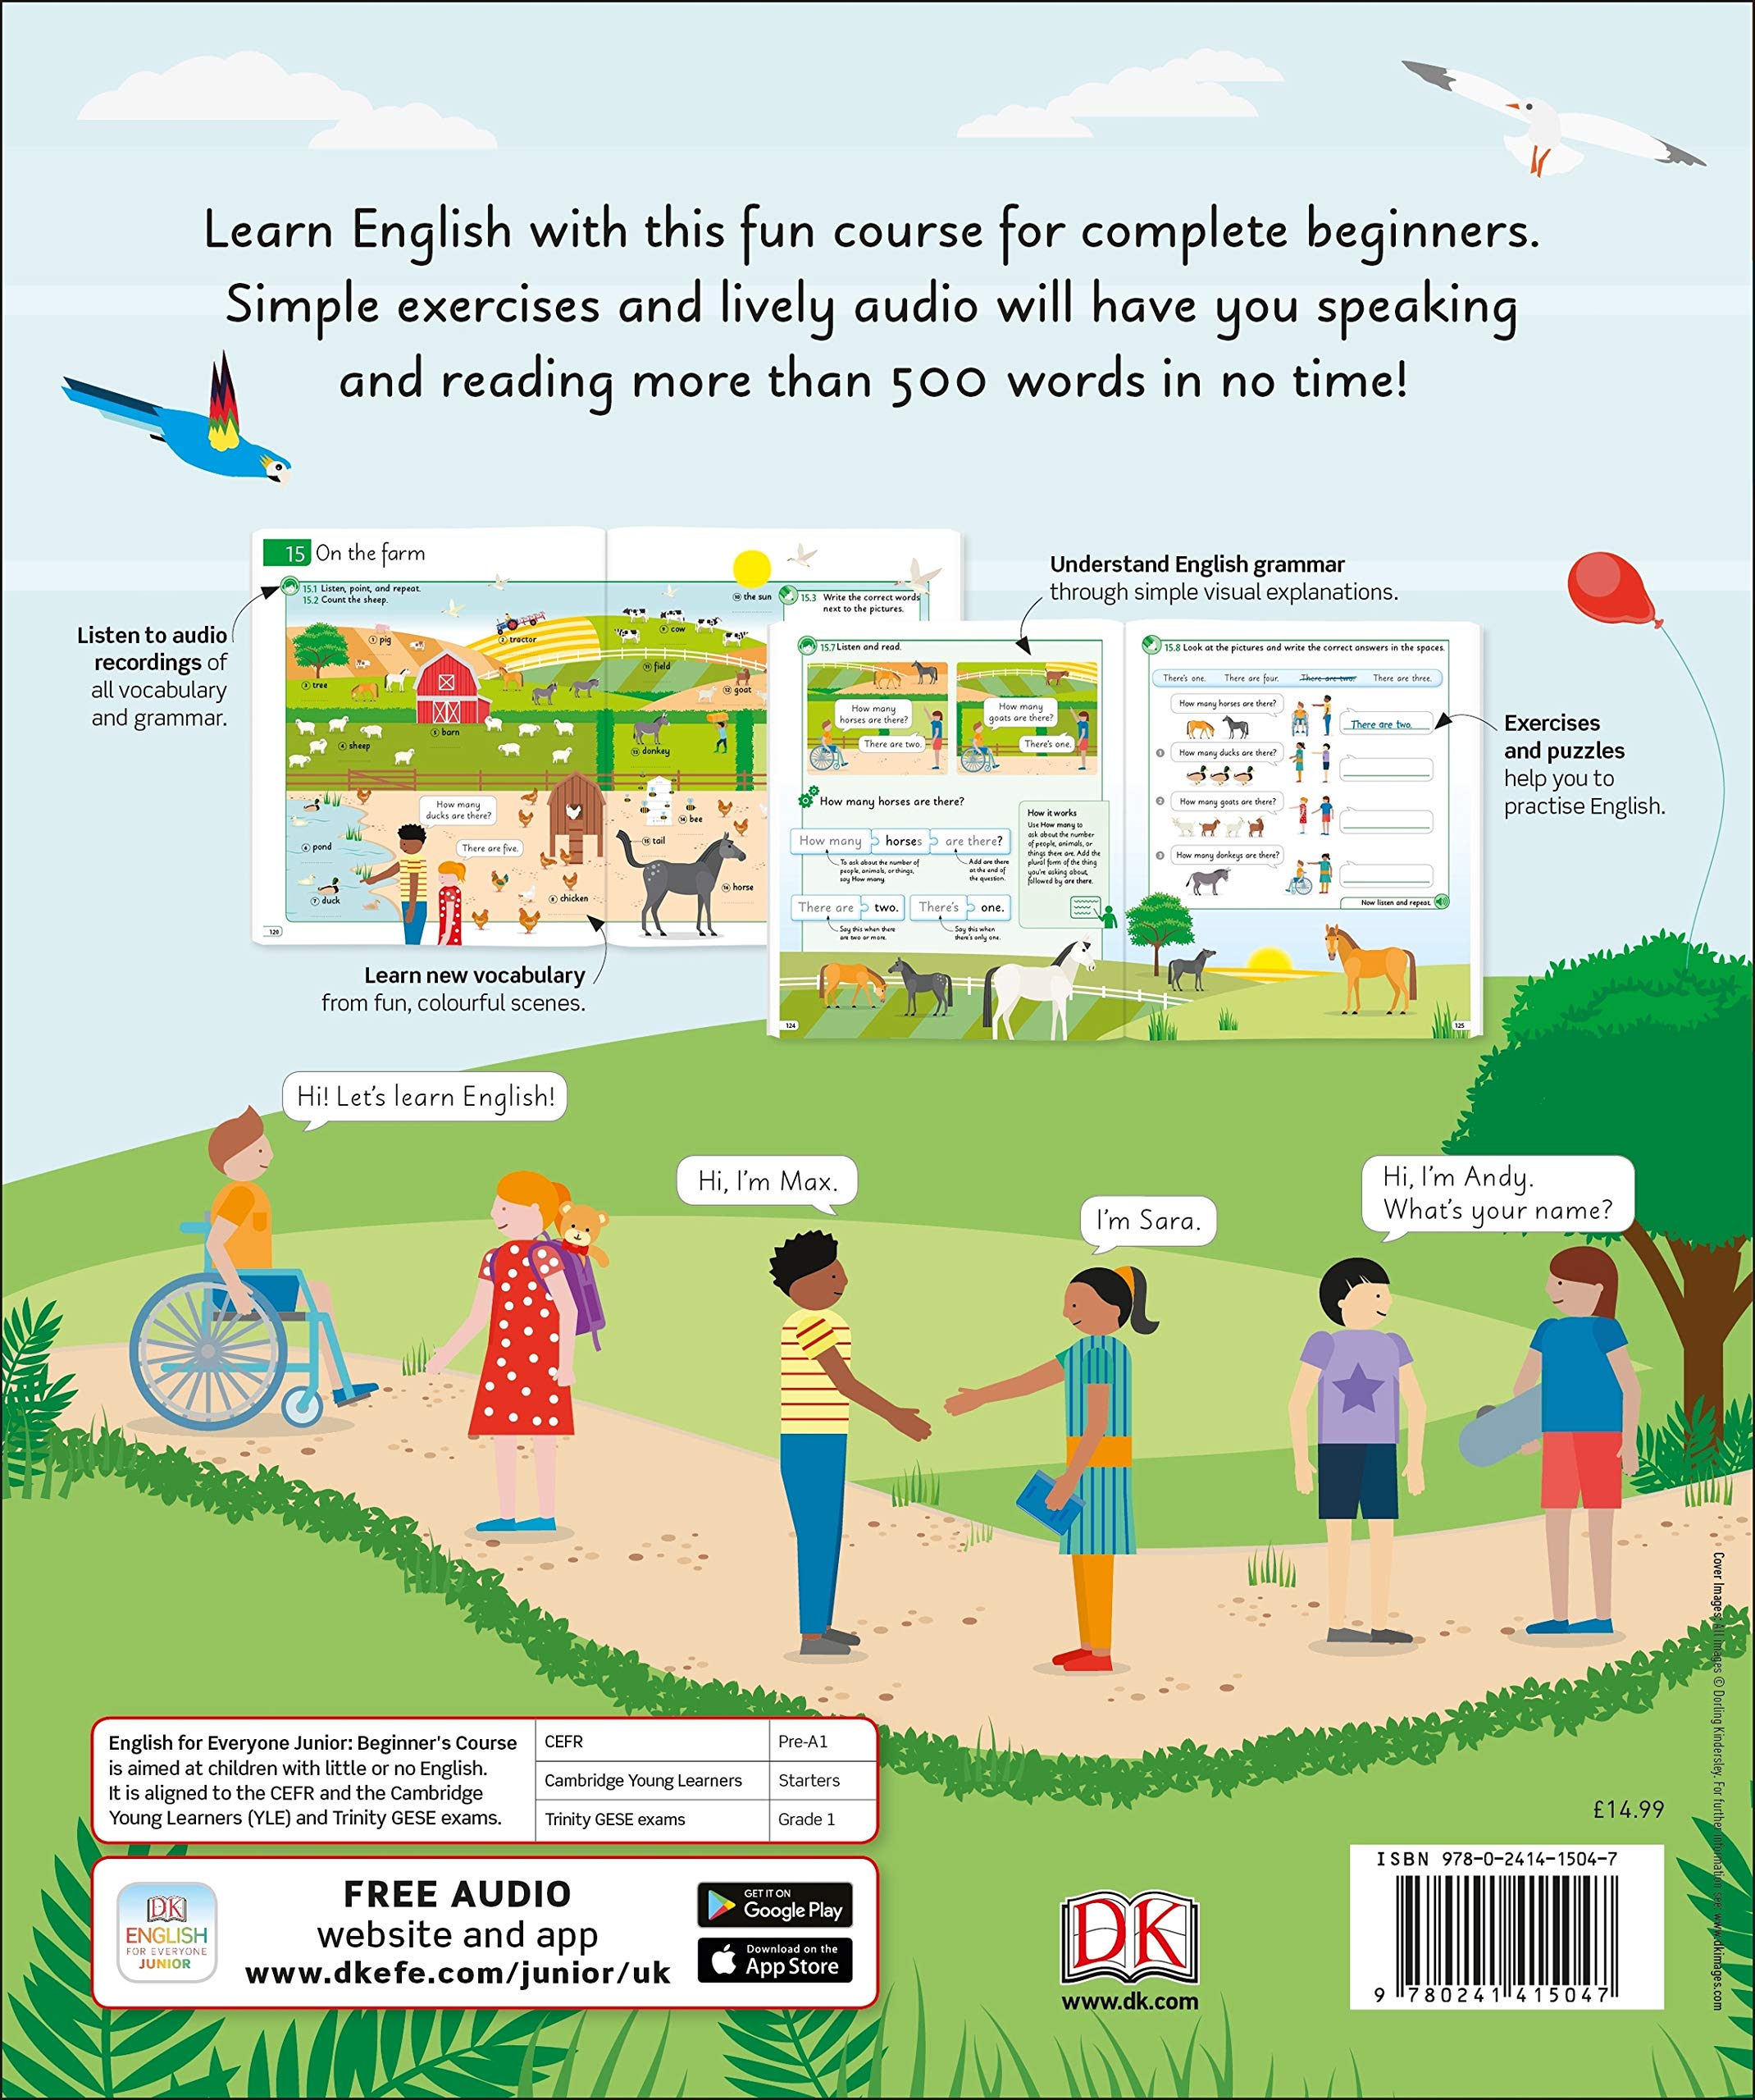 English For Everyone Junior Beginner's Course: Look, Listen And Learn